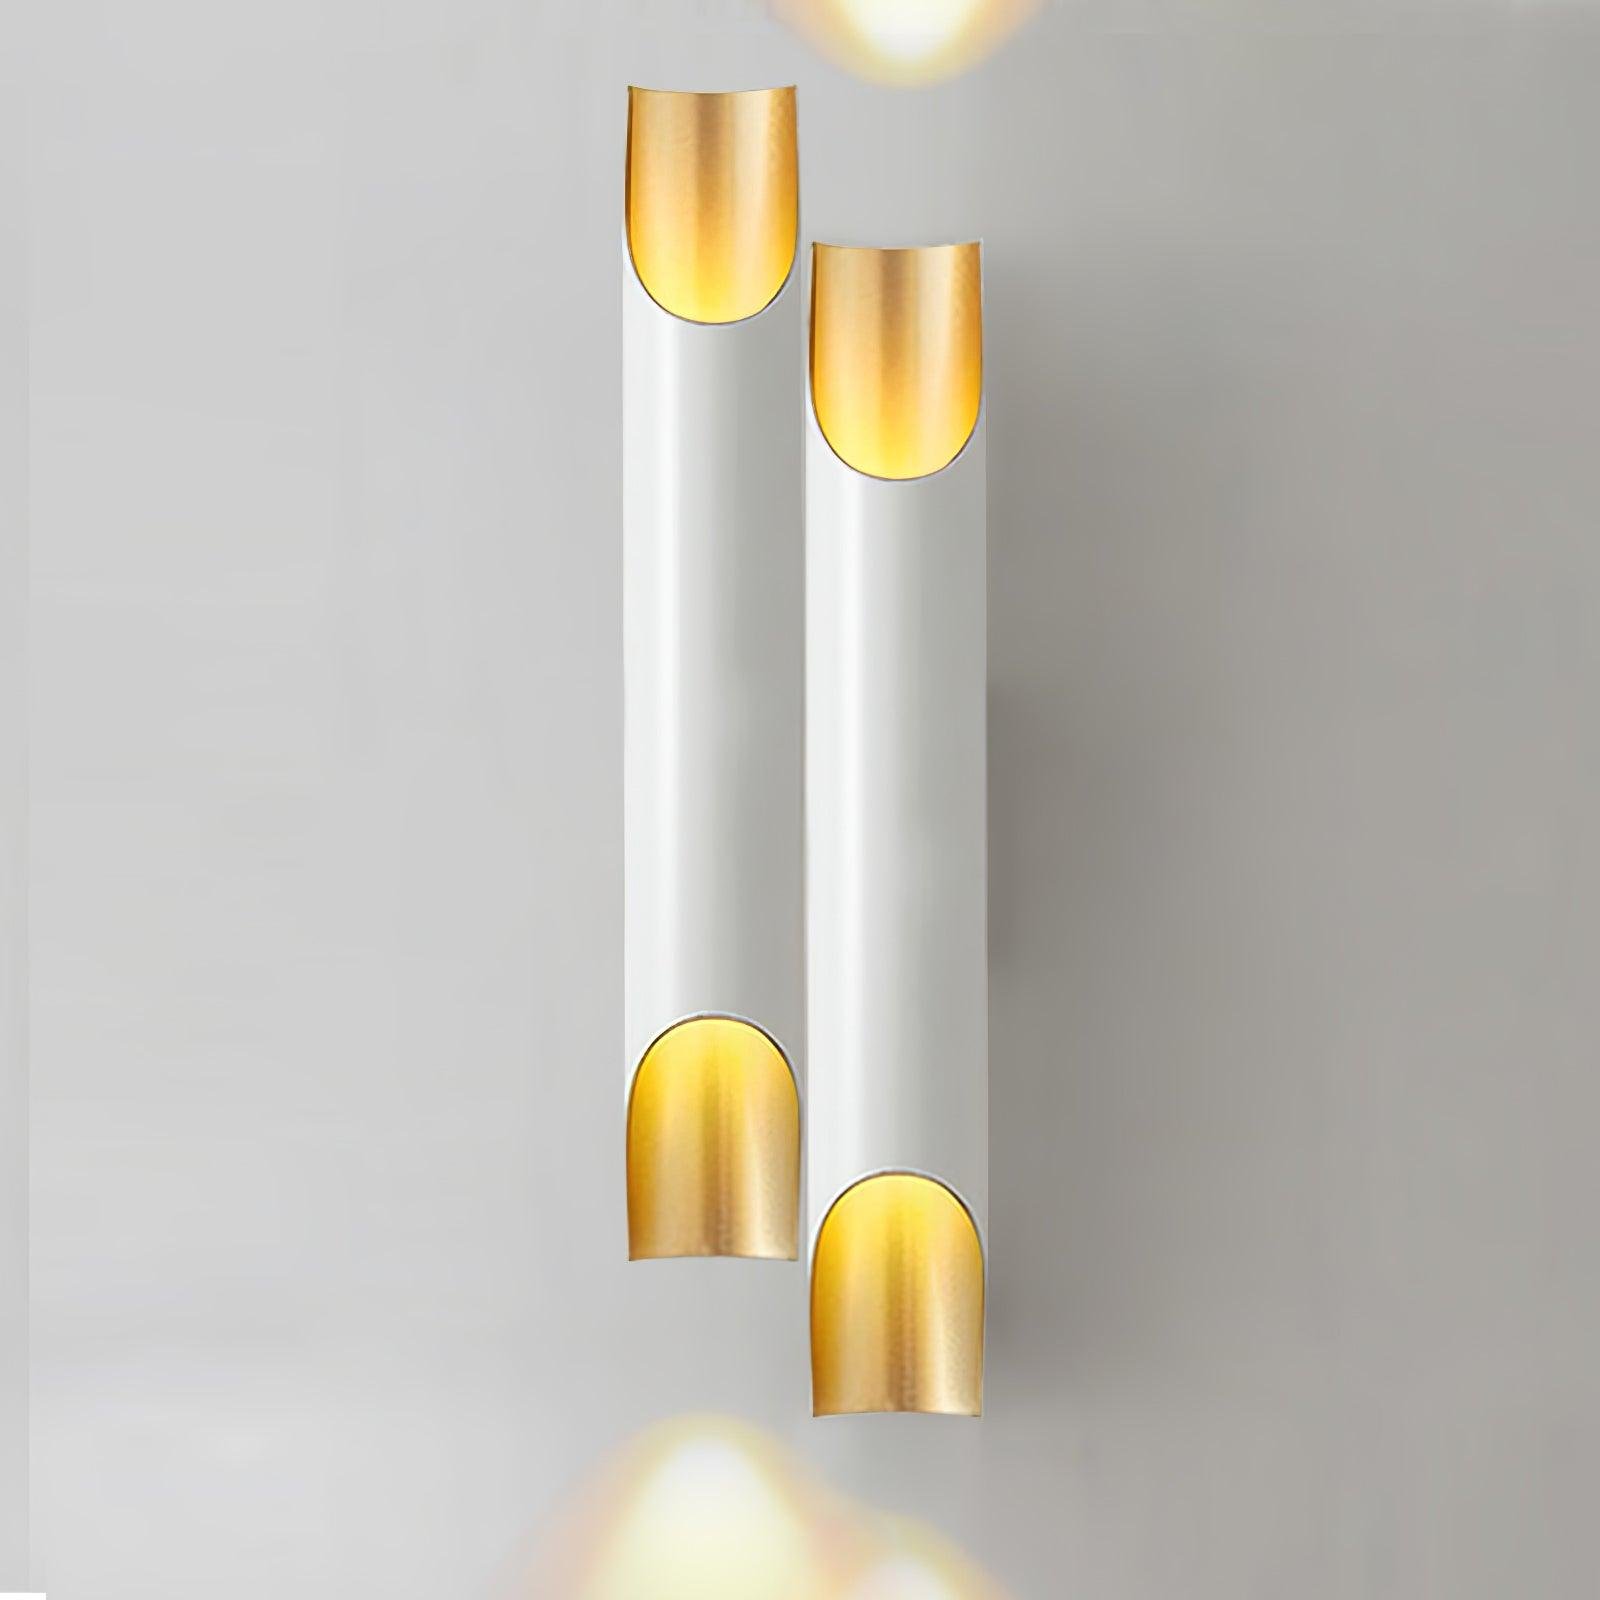 Pair of Abigali Straight Wall Lamps in White and Gold, 4.7 inches Diameter x 18.1 inches Height (12cm x 46cm)"